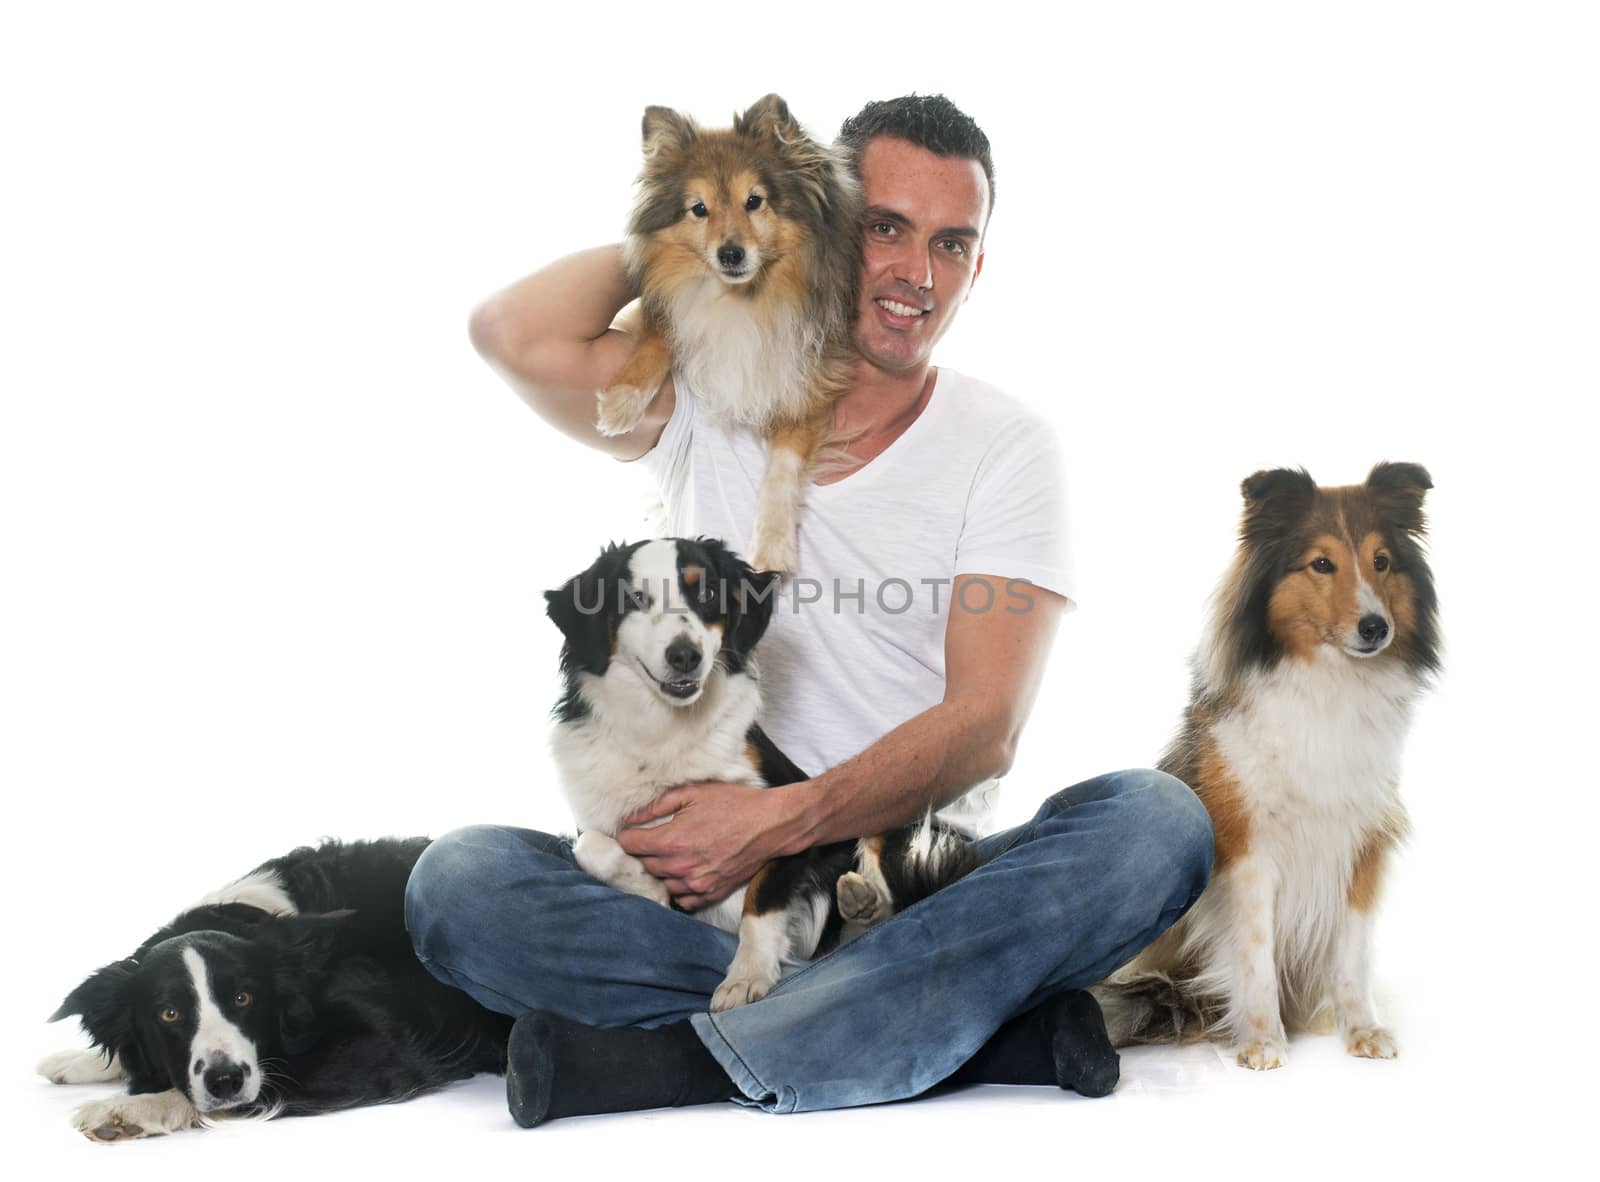 four beautiful dogs and man in front of white background